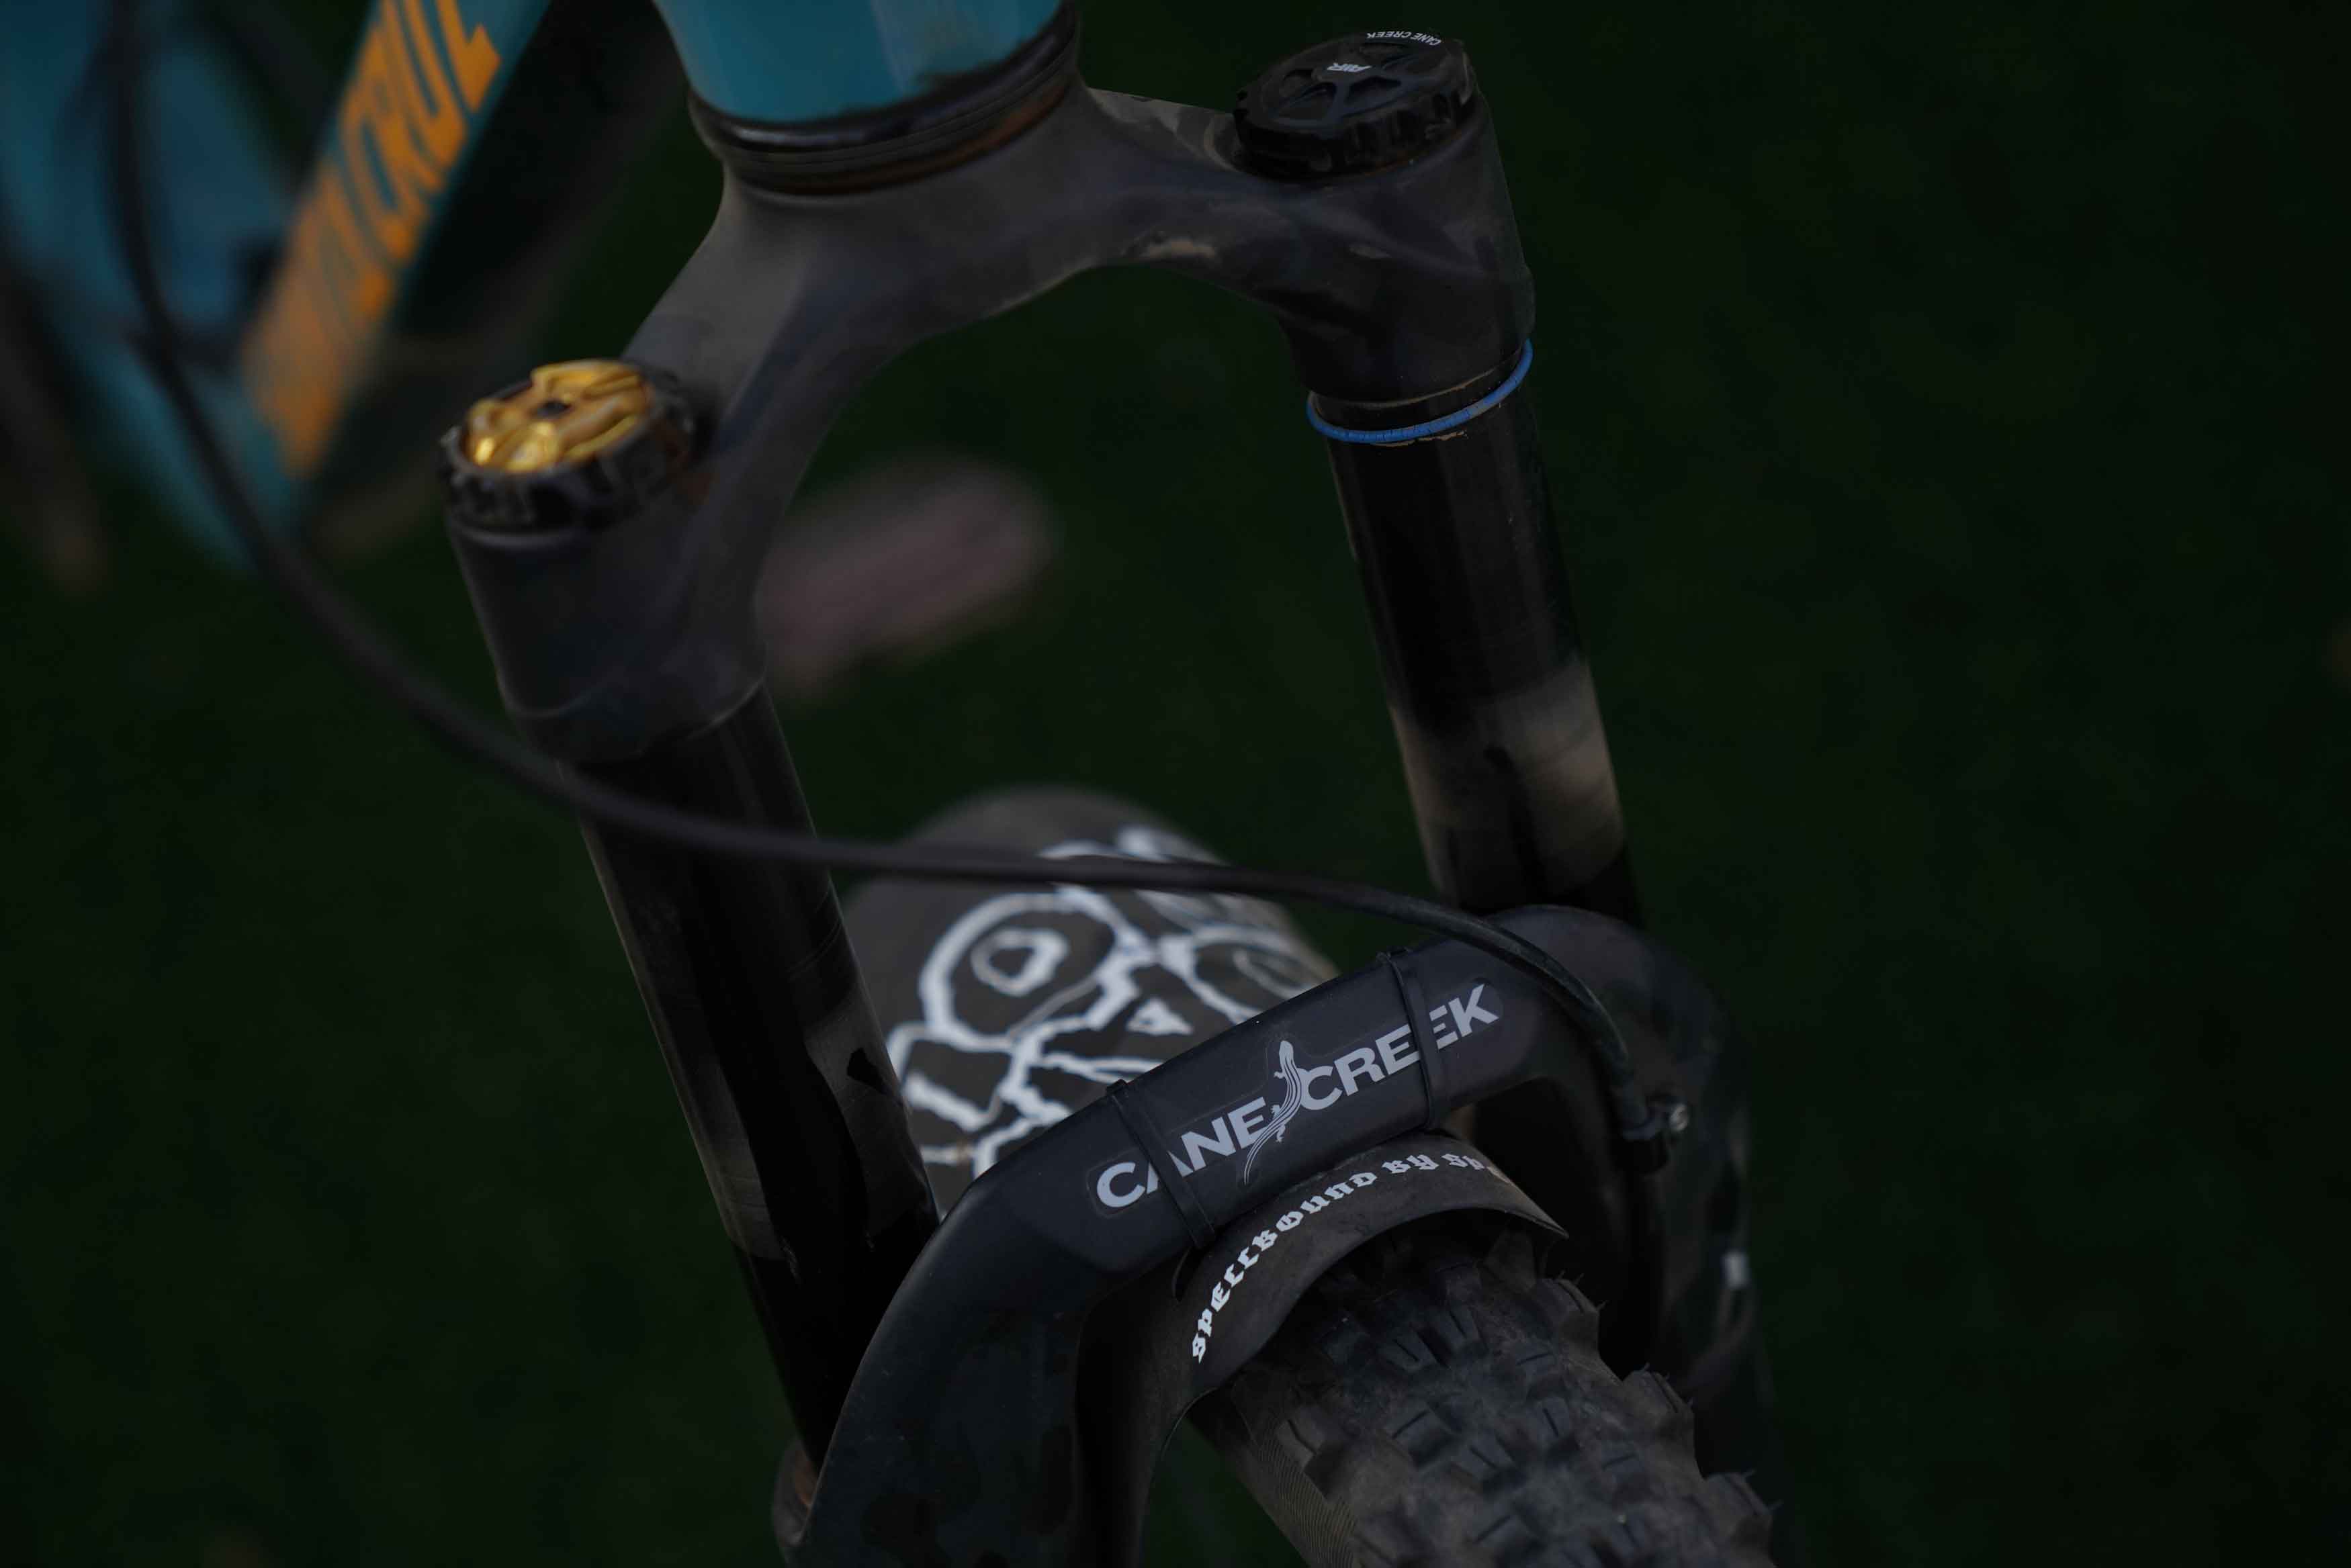 Cane Creek Helm Fork - Best Gifts for Mountain Bikers